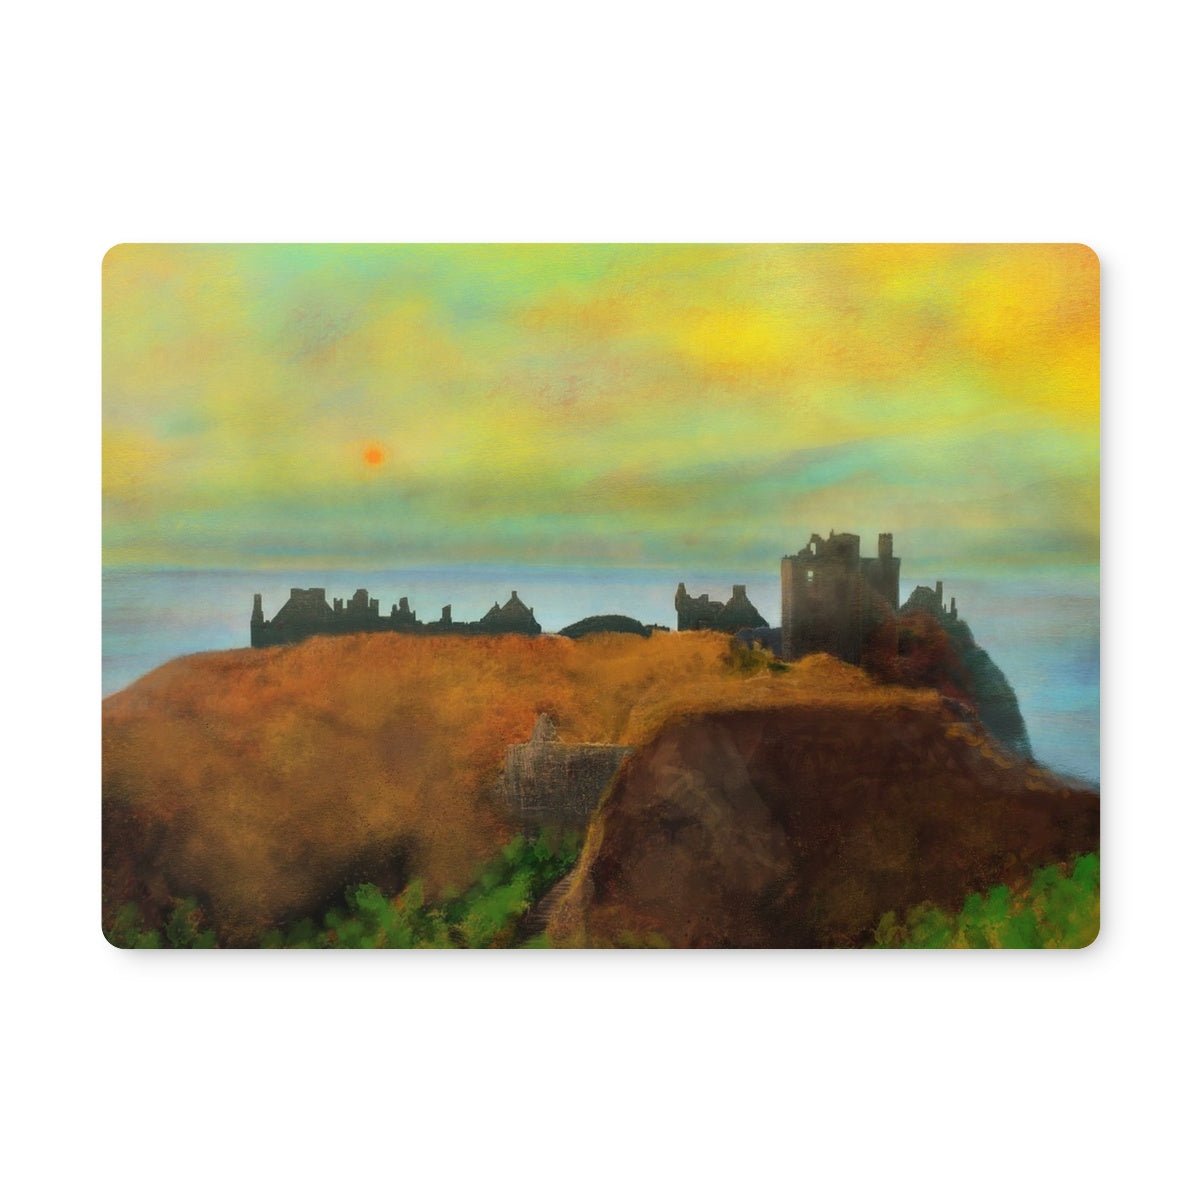 Dunnottar Castle Art Gifts Placemat-Placemats-Scottish Castles Art Gallery-2 Placemats-Paintings, Prints, Homeware, Art Gifts From Scotland By Scottish Artist Kevin Hunter